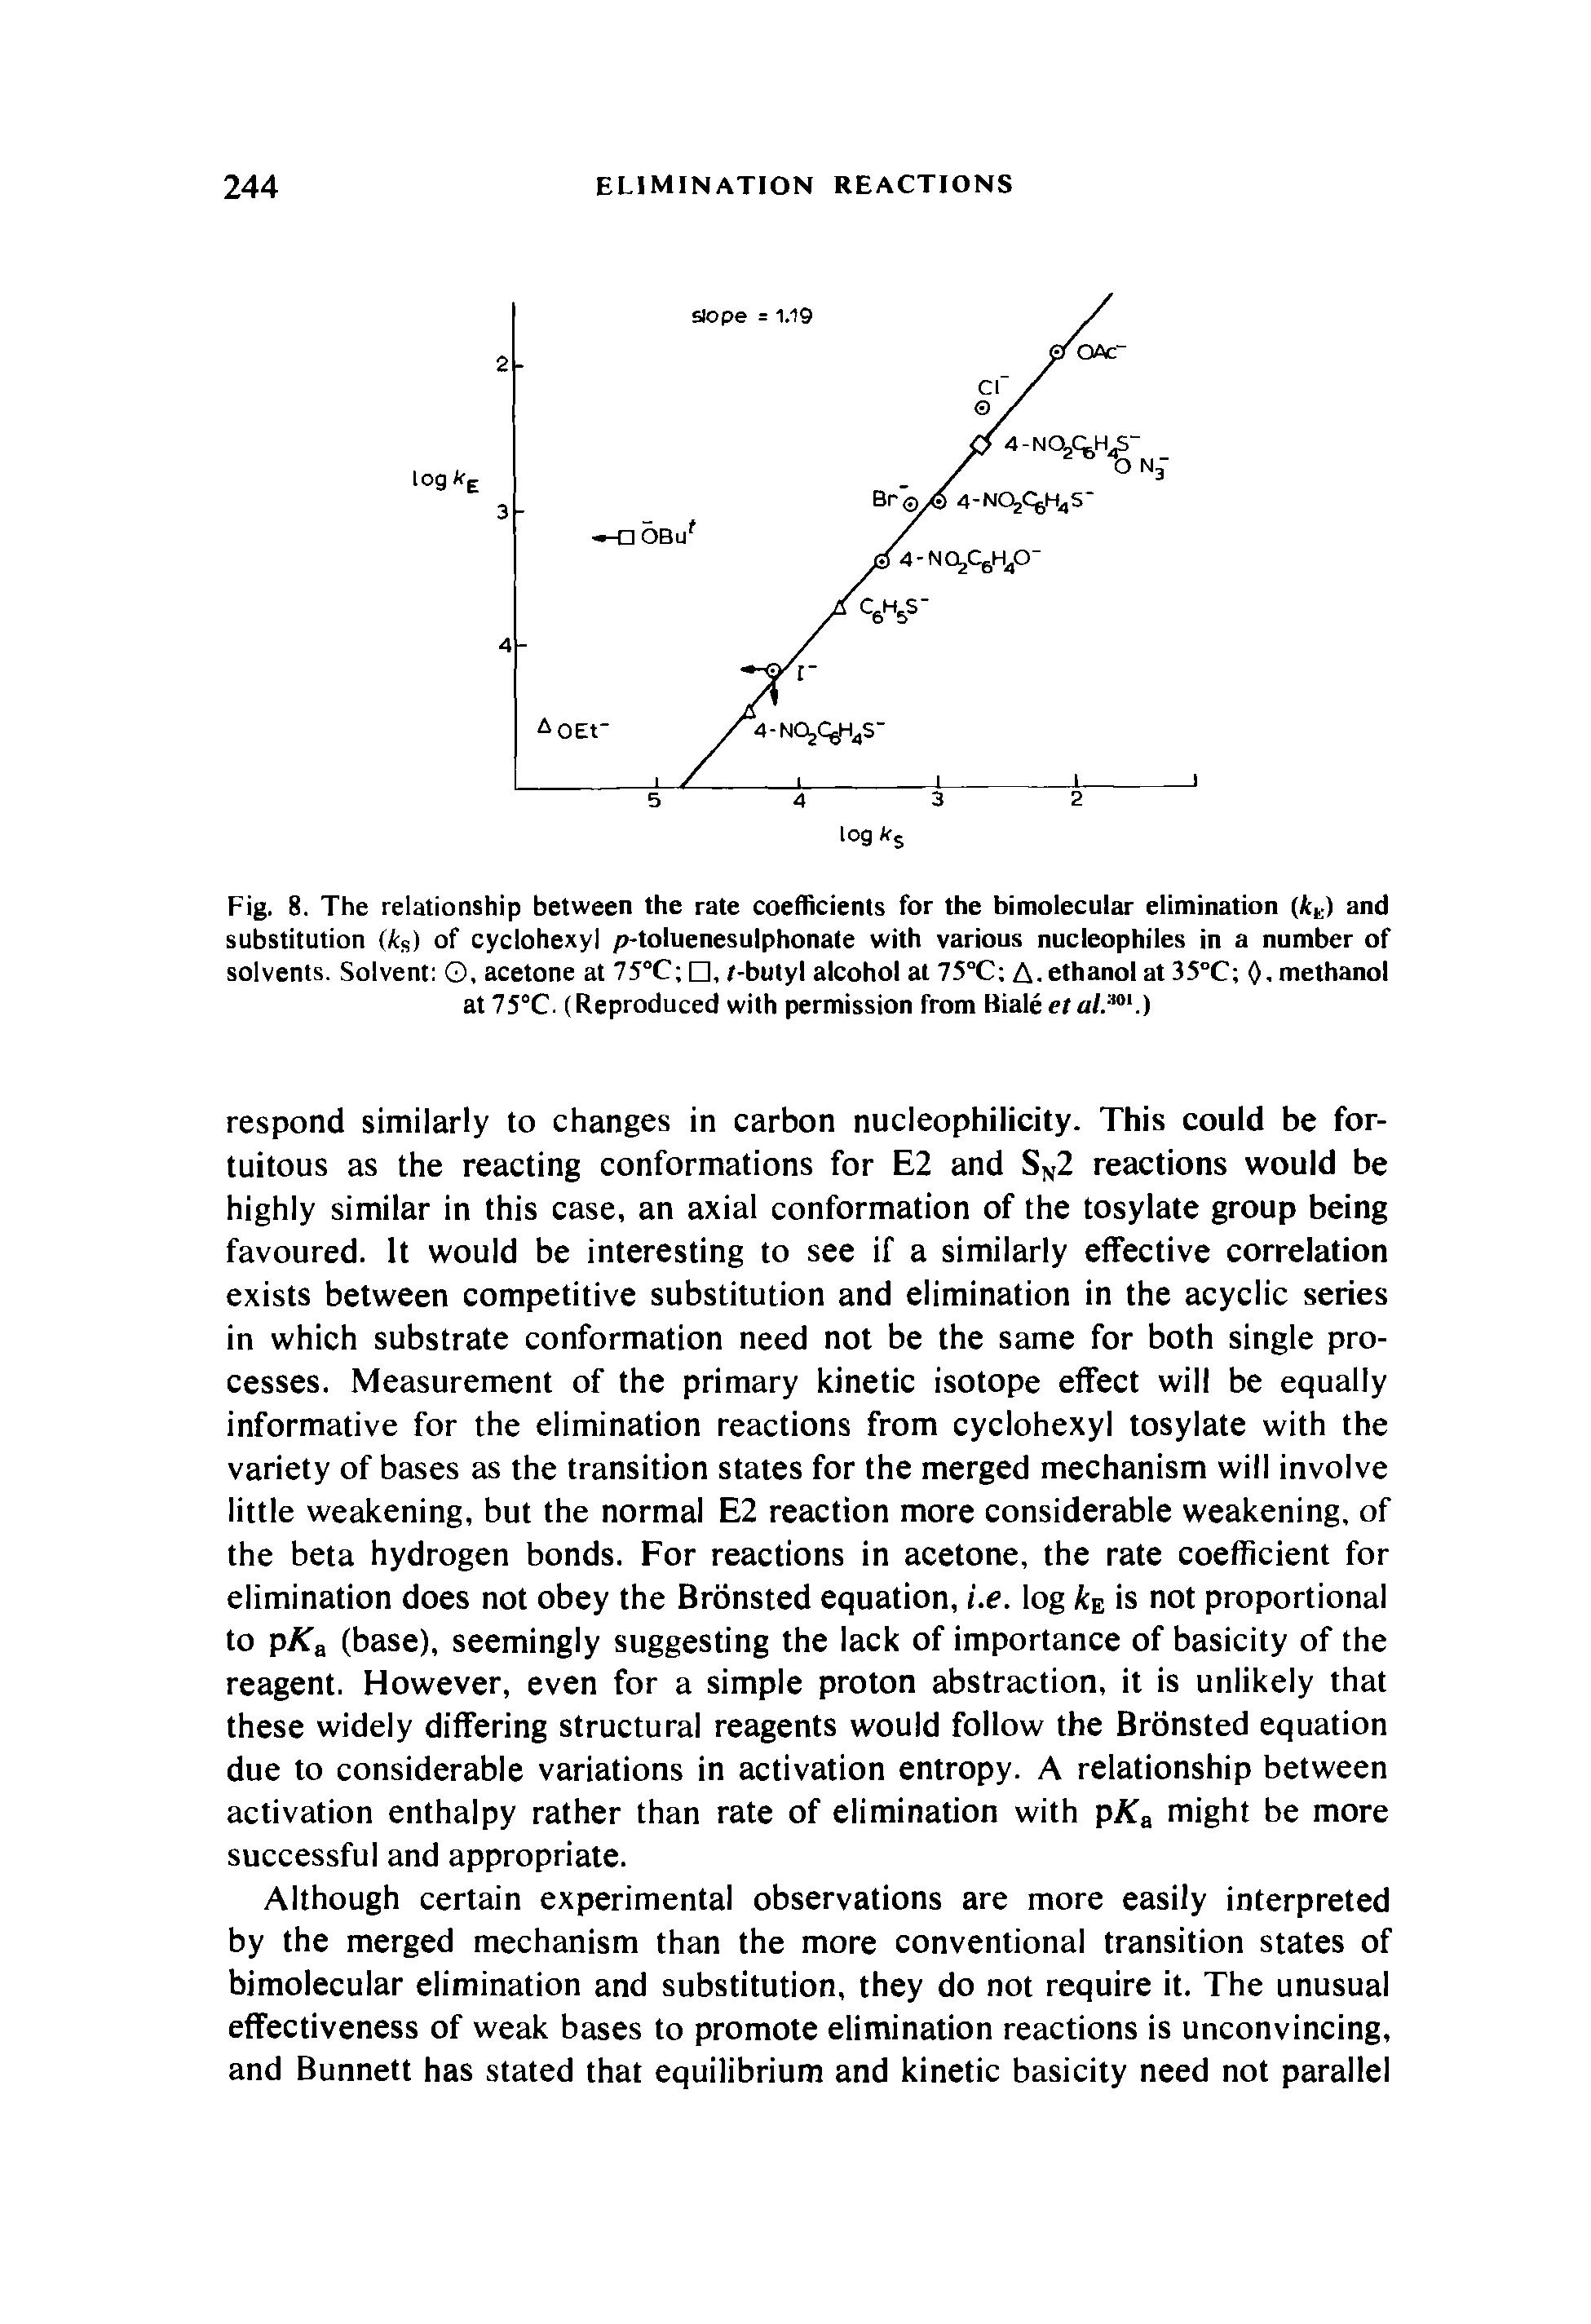 Fig. 8. The relationship between the rate coefficients for the bimolecular elimination k and substitution (kg) of cyclohexyl p-toluenesulphonate with various nucleophiles in a number of solvents. Solvent O, acetone at 75°C , /-butyl alcohol at 75°C A. ethanol at 35°C 0< methanol at 75°C. (Reproduced with permission from Biale e/a/. .)...